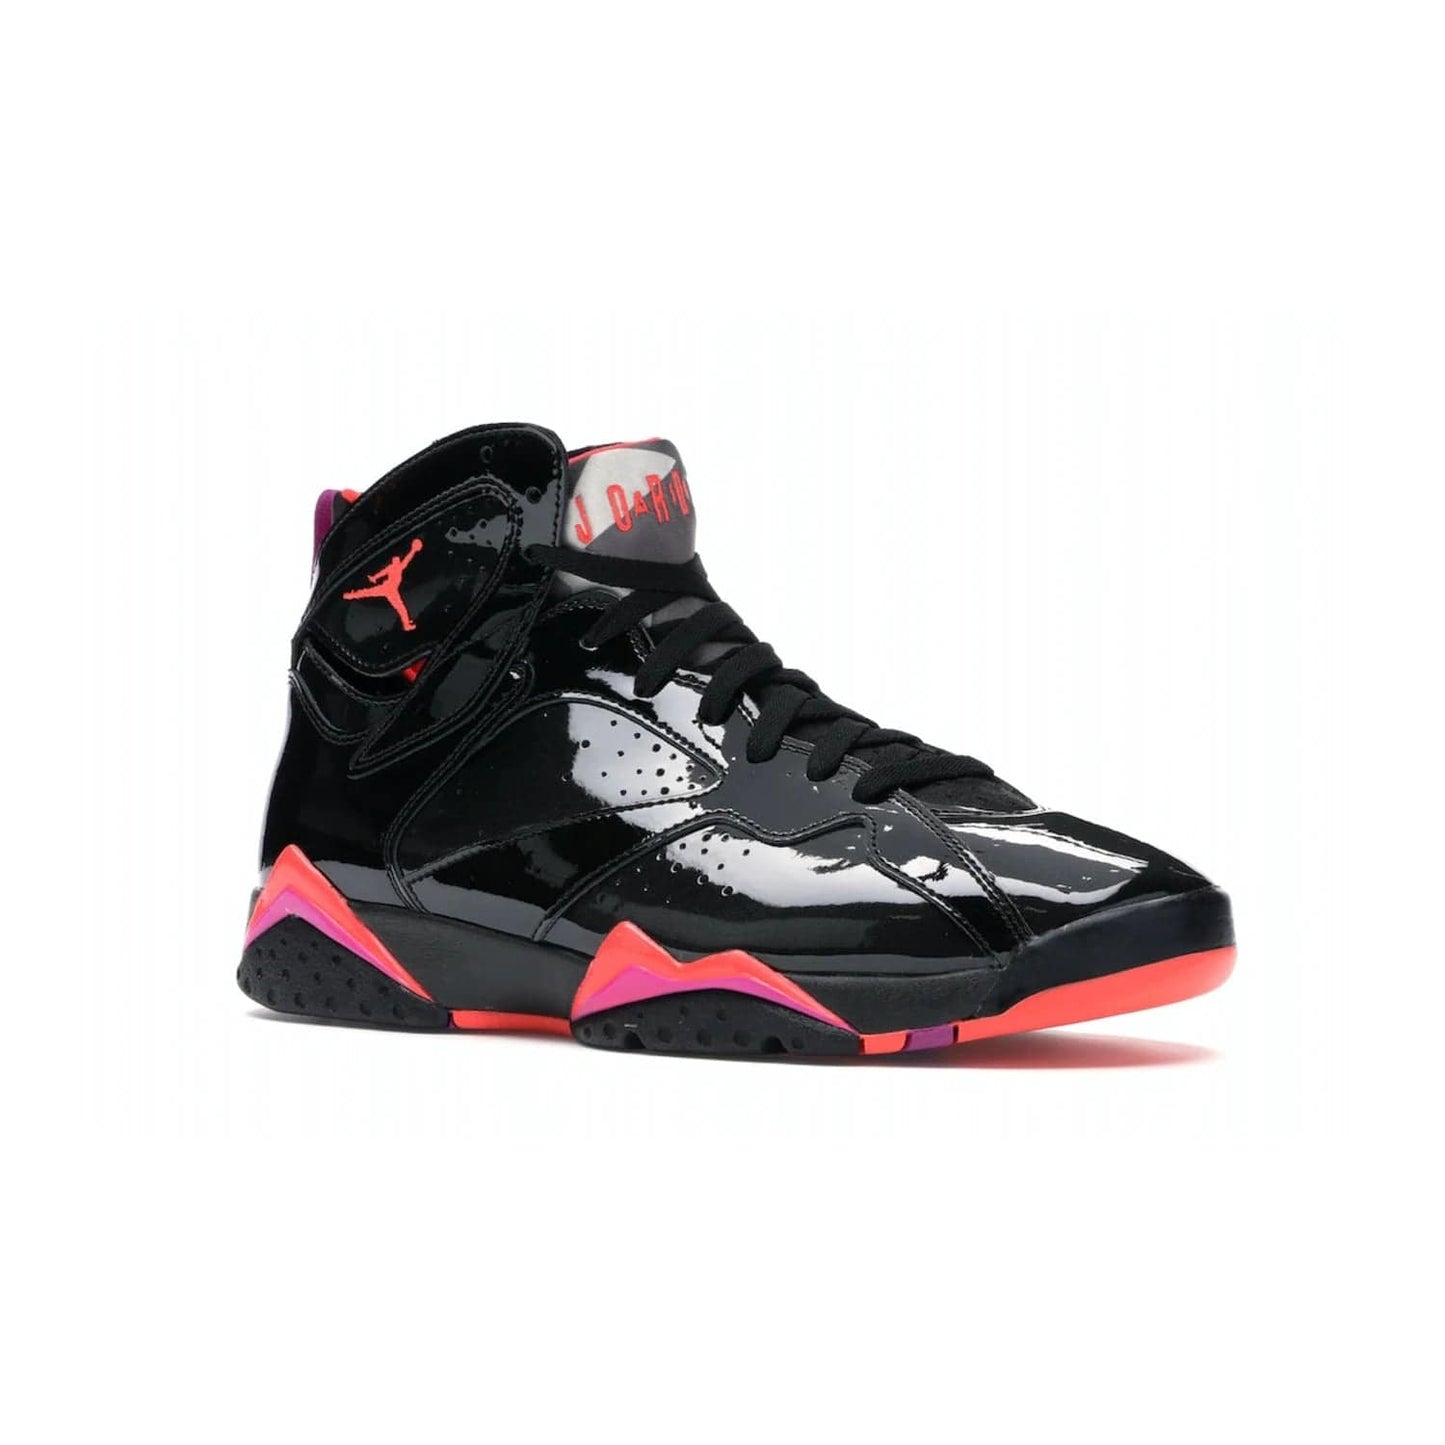 Jordan 7 Retro Black Patent (Women's) - Image 4 - Only at www.BallersClubKickz.com - #
Classic colorway! Shop the new Jordan 7 Retro Black Patent. Featuring a sleek combination of leather and patent leather upper, these shoes offer a bold yet luxurious look. Perfectly complete with a bright red Jumpman logo. Self-lacing Smart laces and Air-Sole cushion unit provide comfort and convenience.